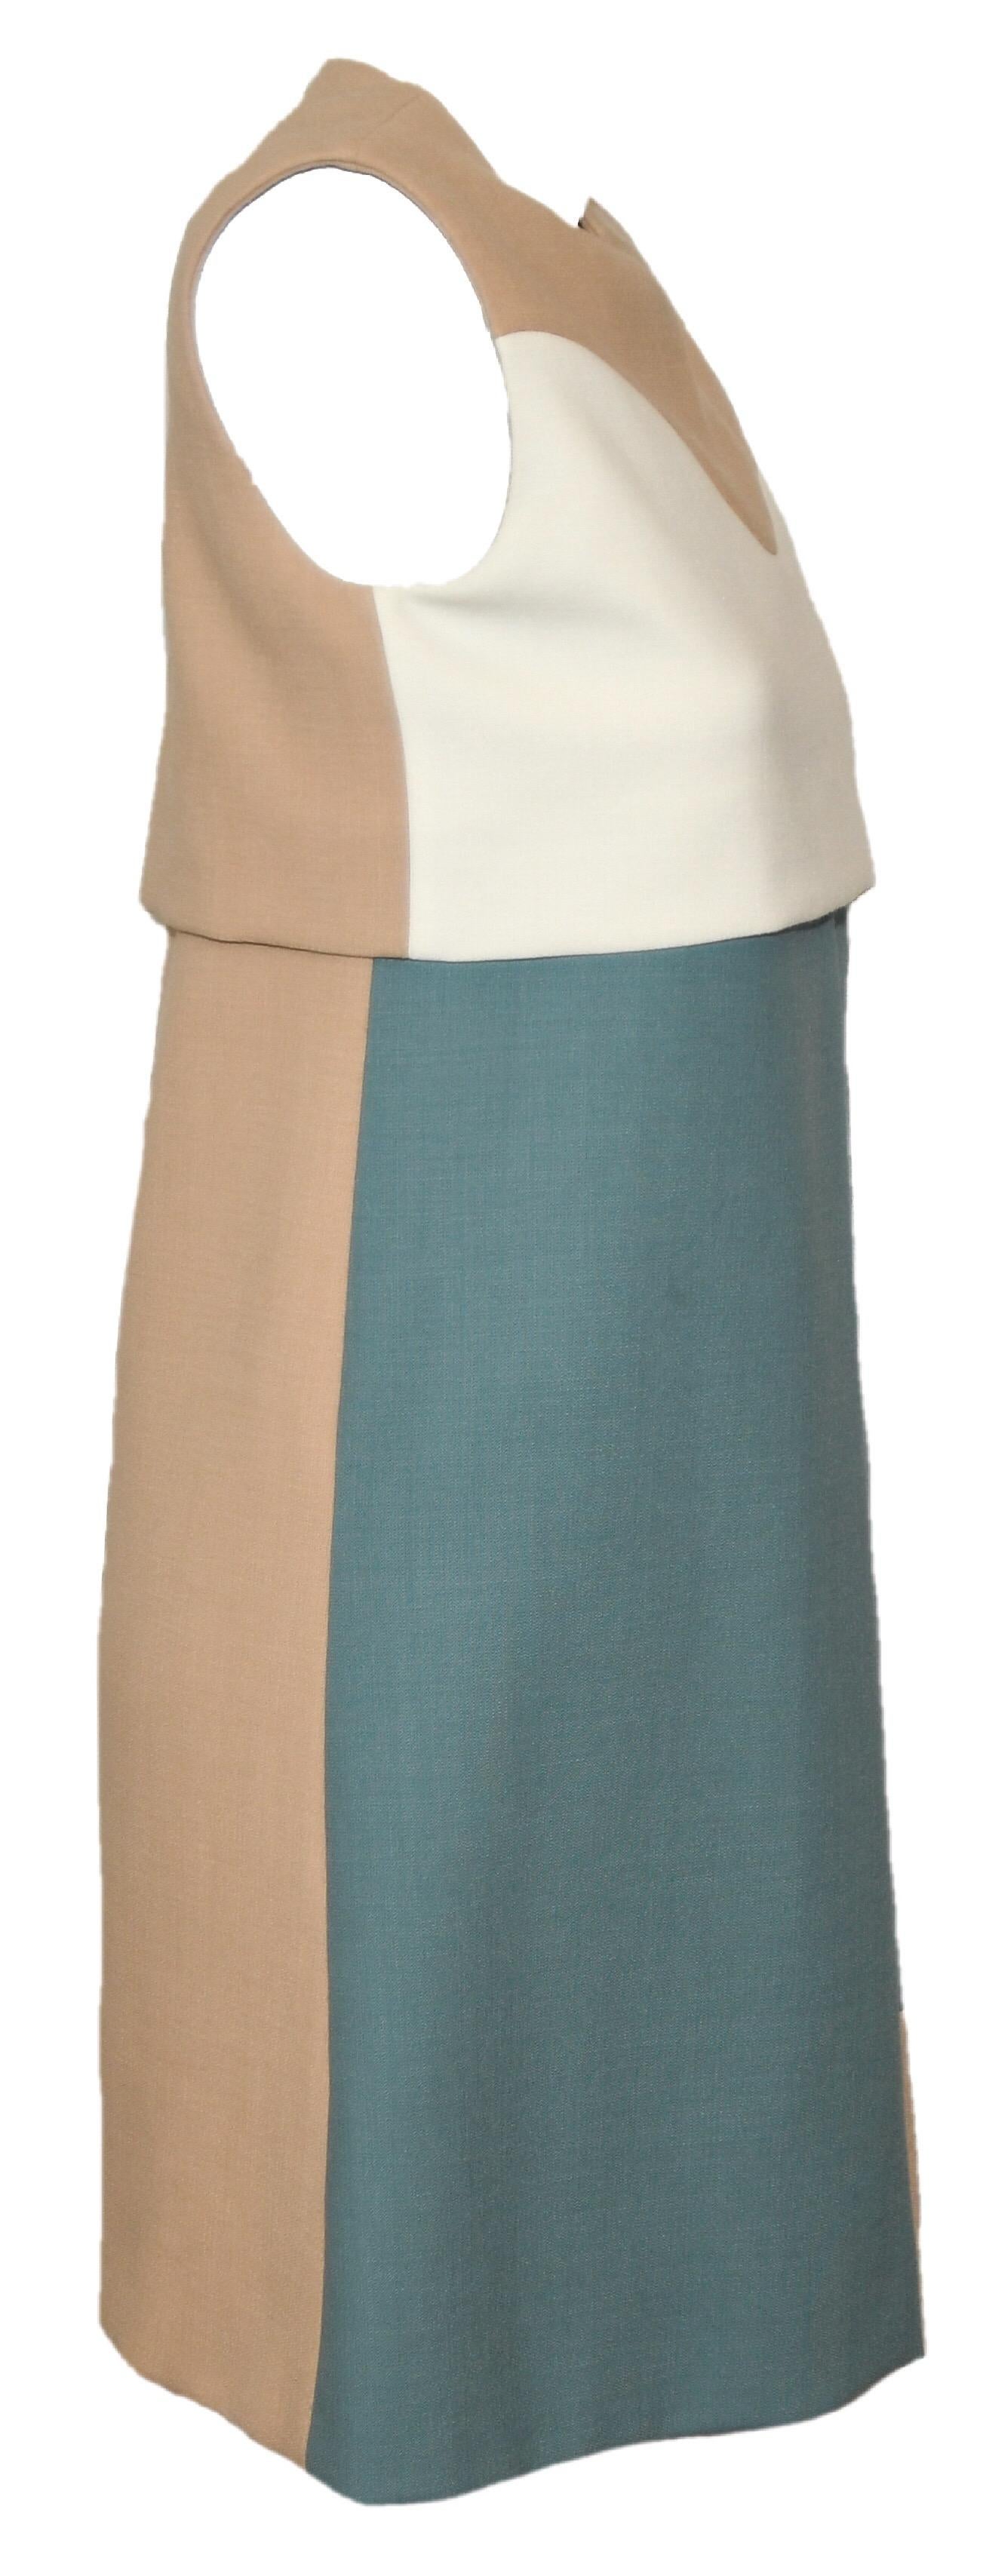 Chloe Color Block White, Tan & Sage Sleeveless Dress With Front Pleat  In Excellent Condition For Sale In Palm Beach, FL